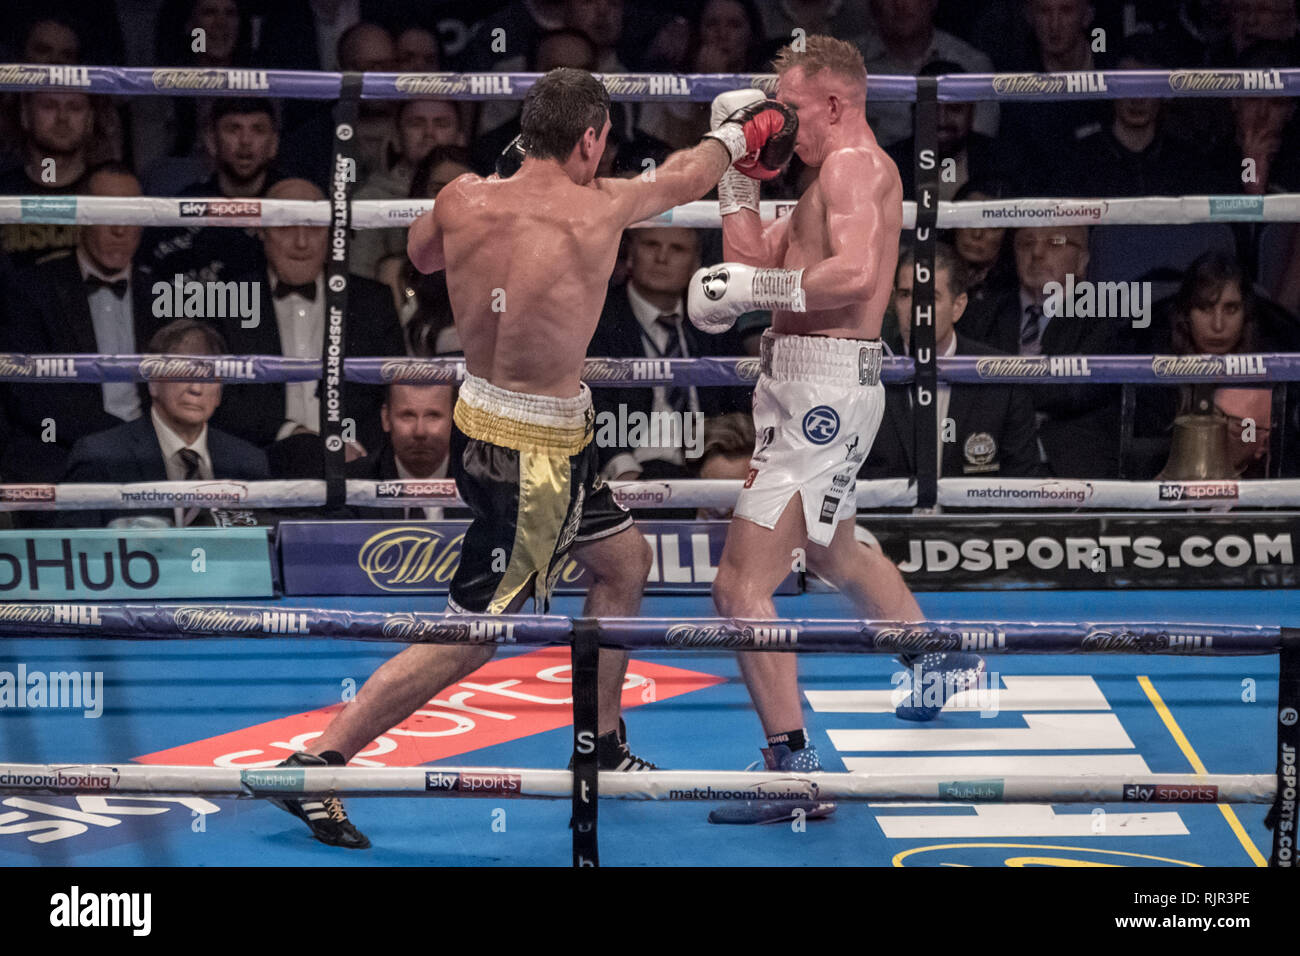 Sergio Garcia vs. Ted Cheeseman. European super-welterweight champion title at The O2 arena. Credit: Guy Corbishley/Alamy Live News Stock Photo